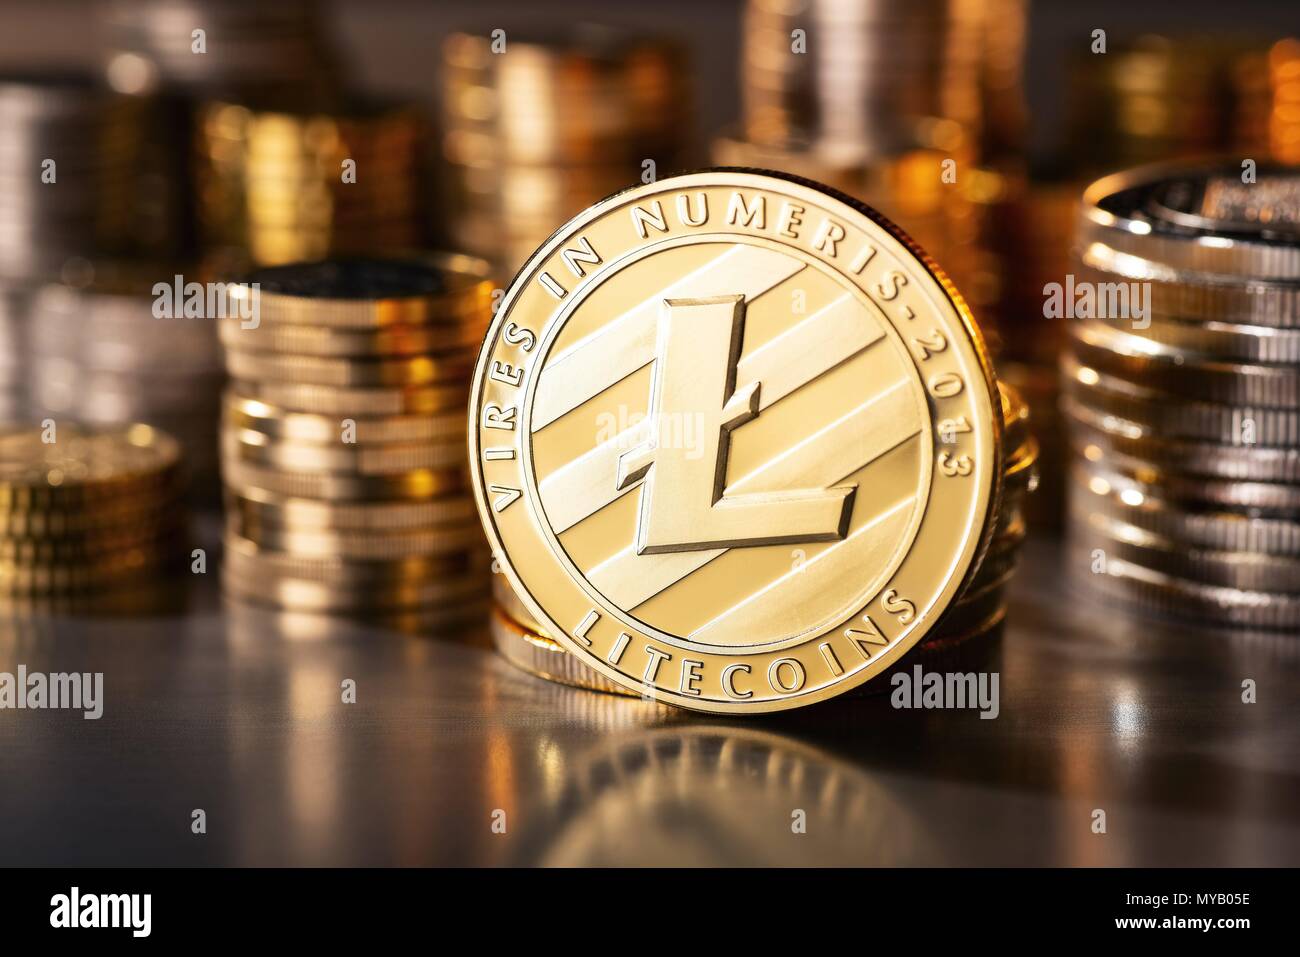 Coin of the crypto currency Litecoin with several stacks of coins in the background | usage worldwide Stock Photo